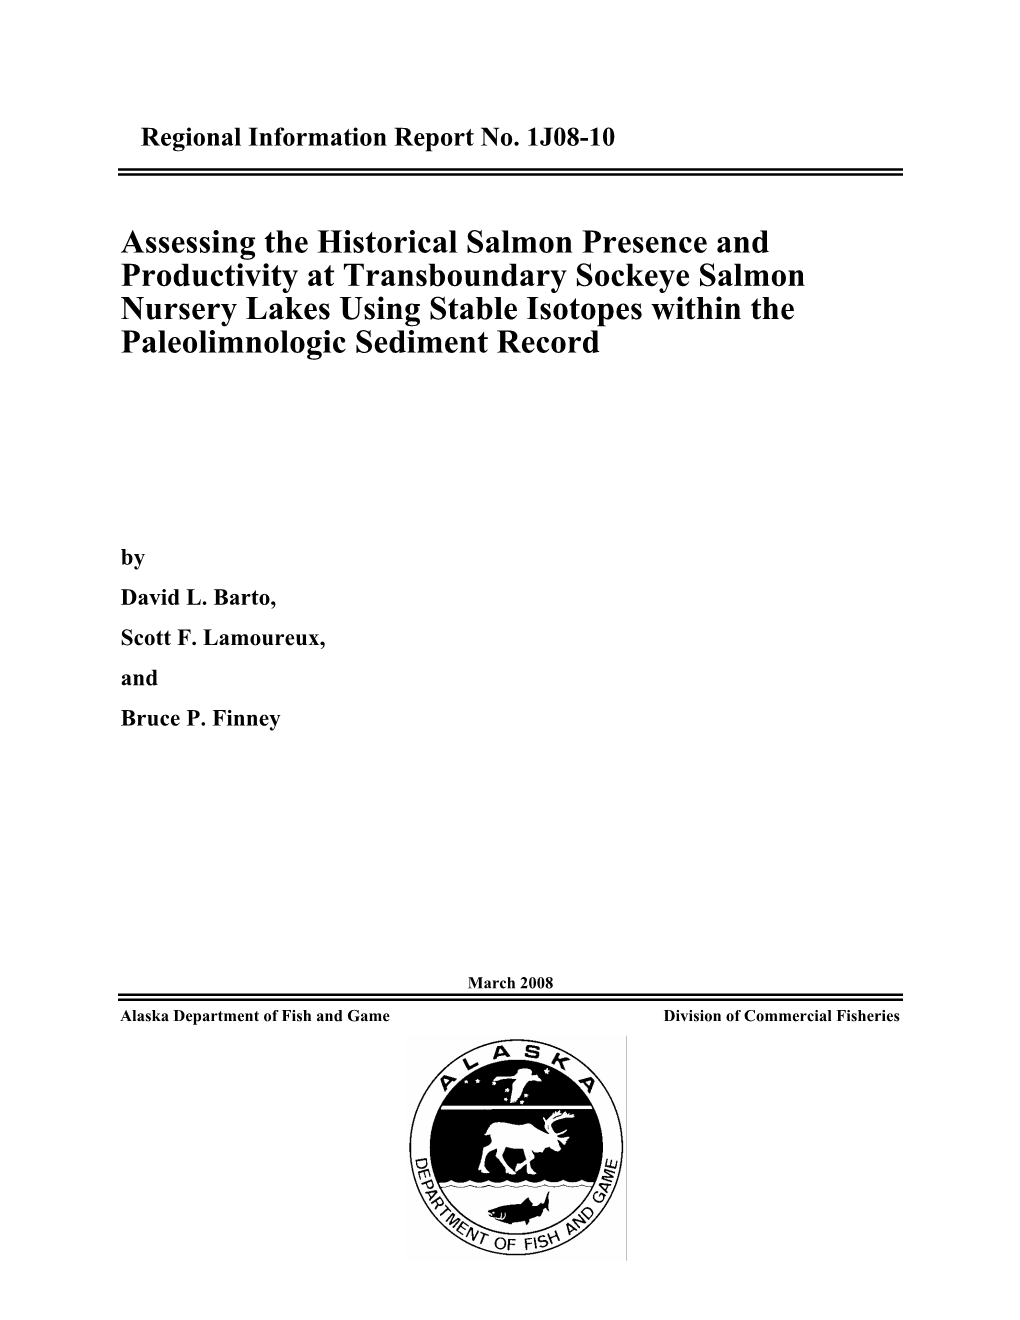 Assessing the Historical Salmon Presence and Productivity At